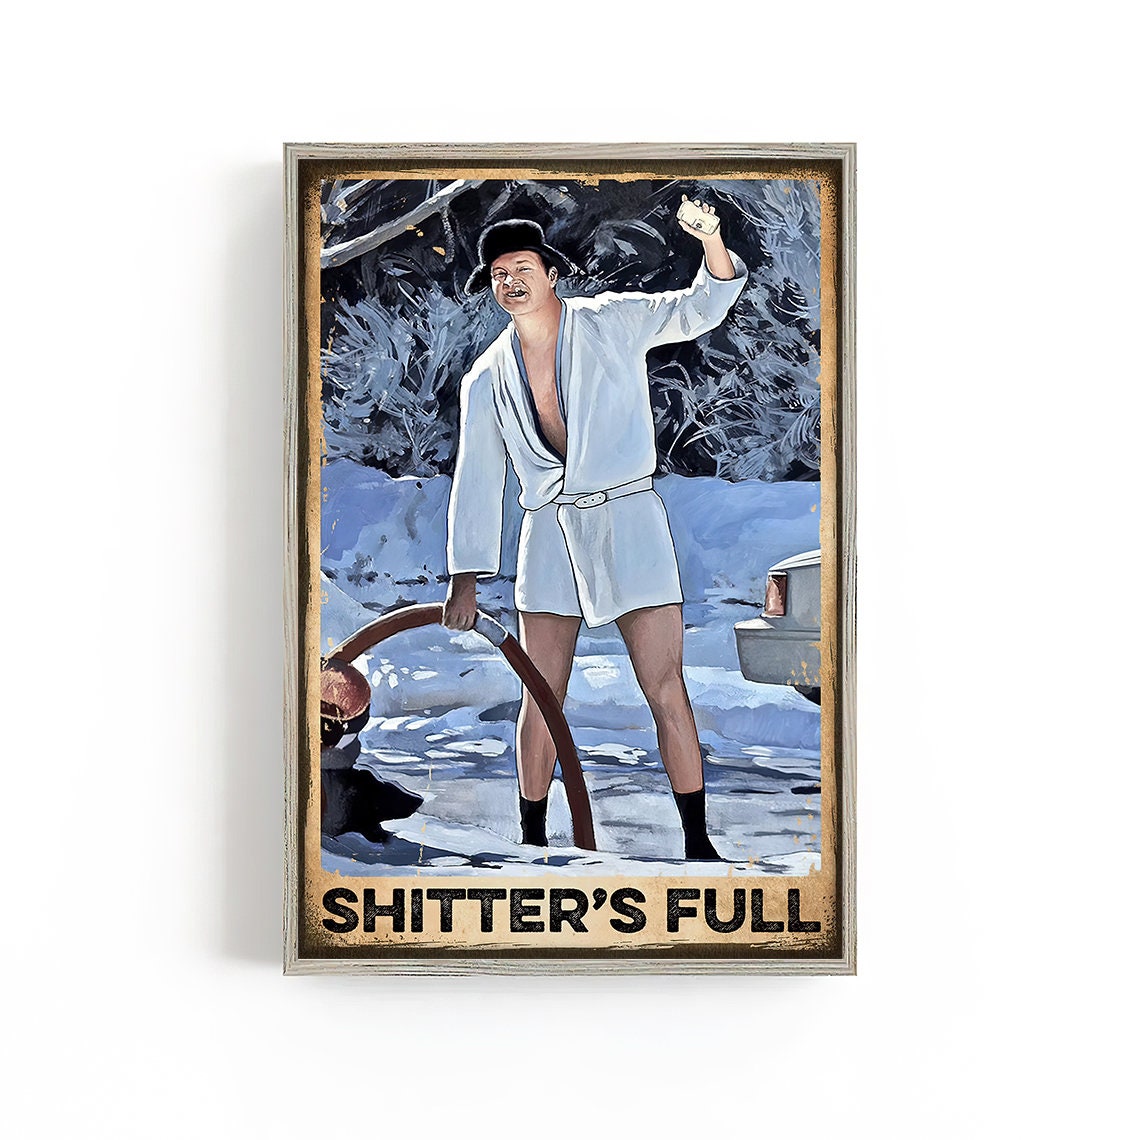 Shitter's Full Home Living Decor Poster, National Lampoon's Christmas Vacation poster